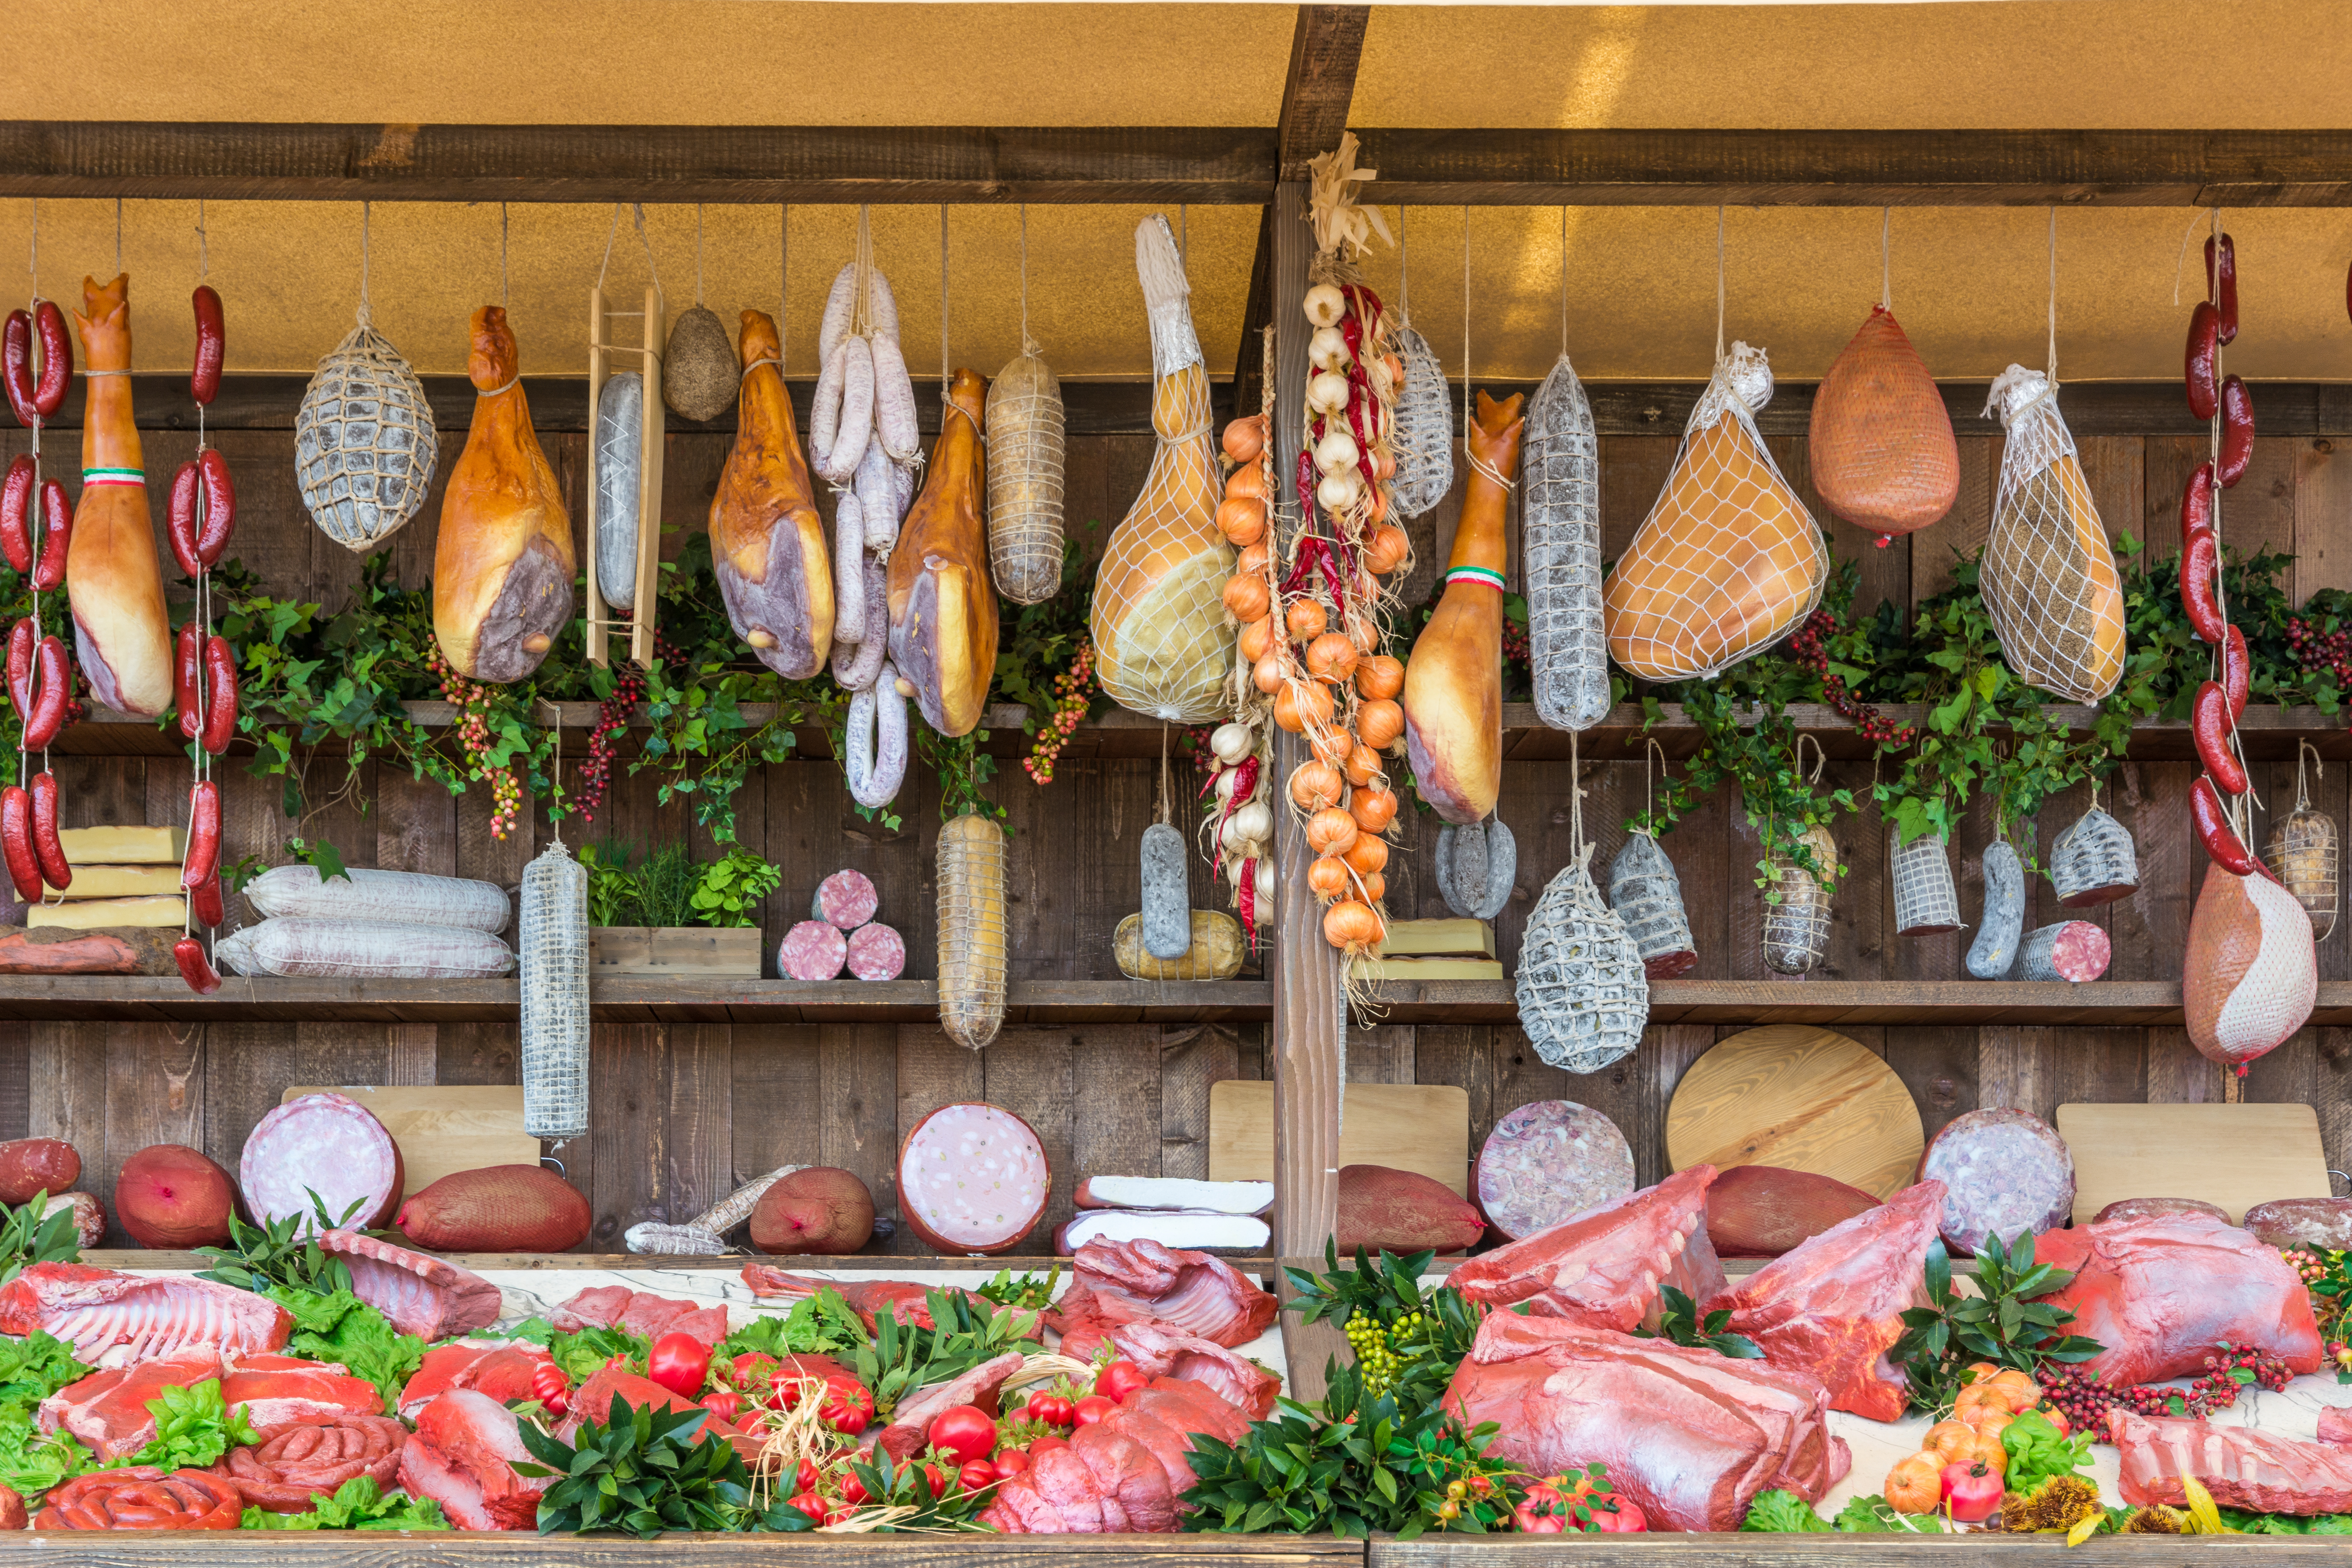 Salami in a wooden market stall